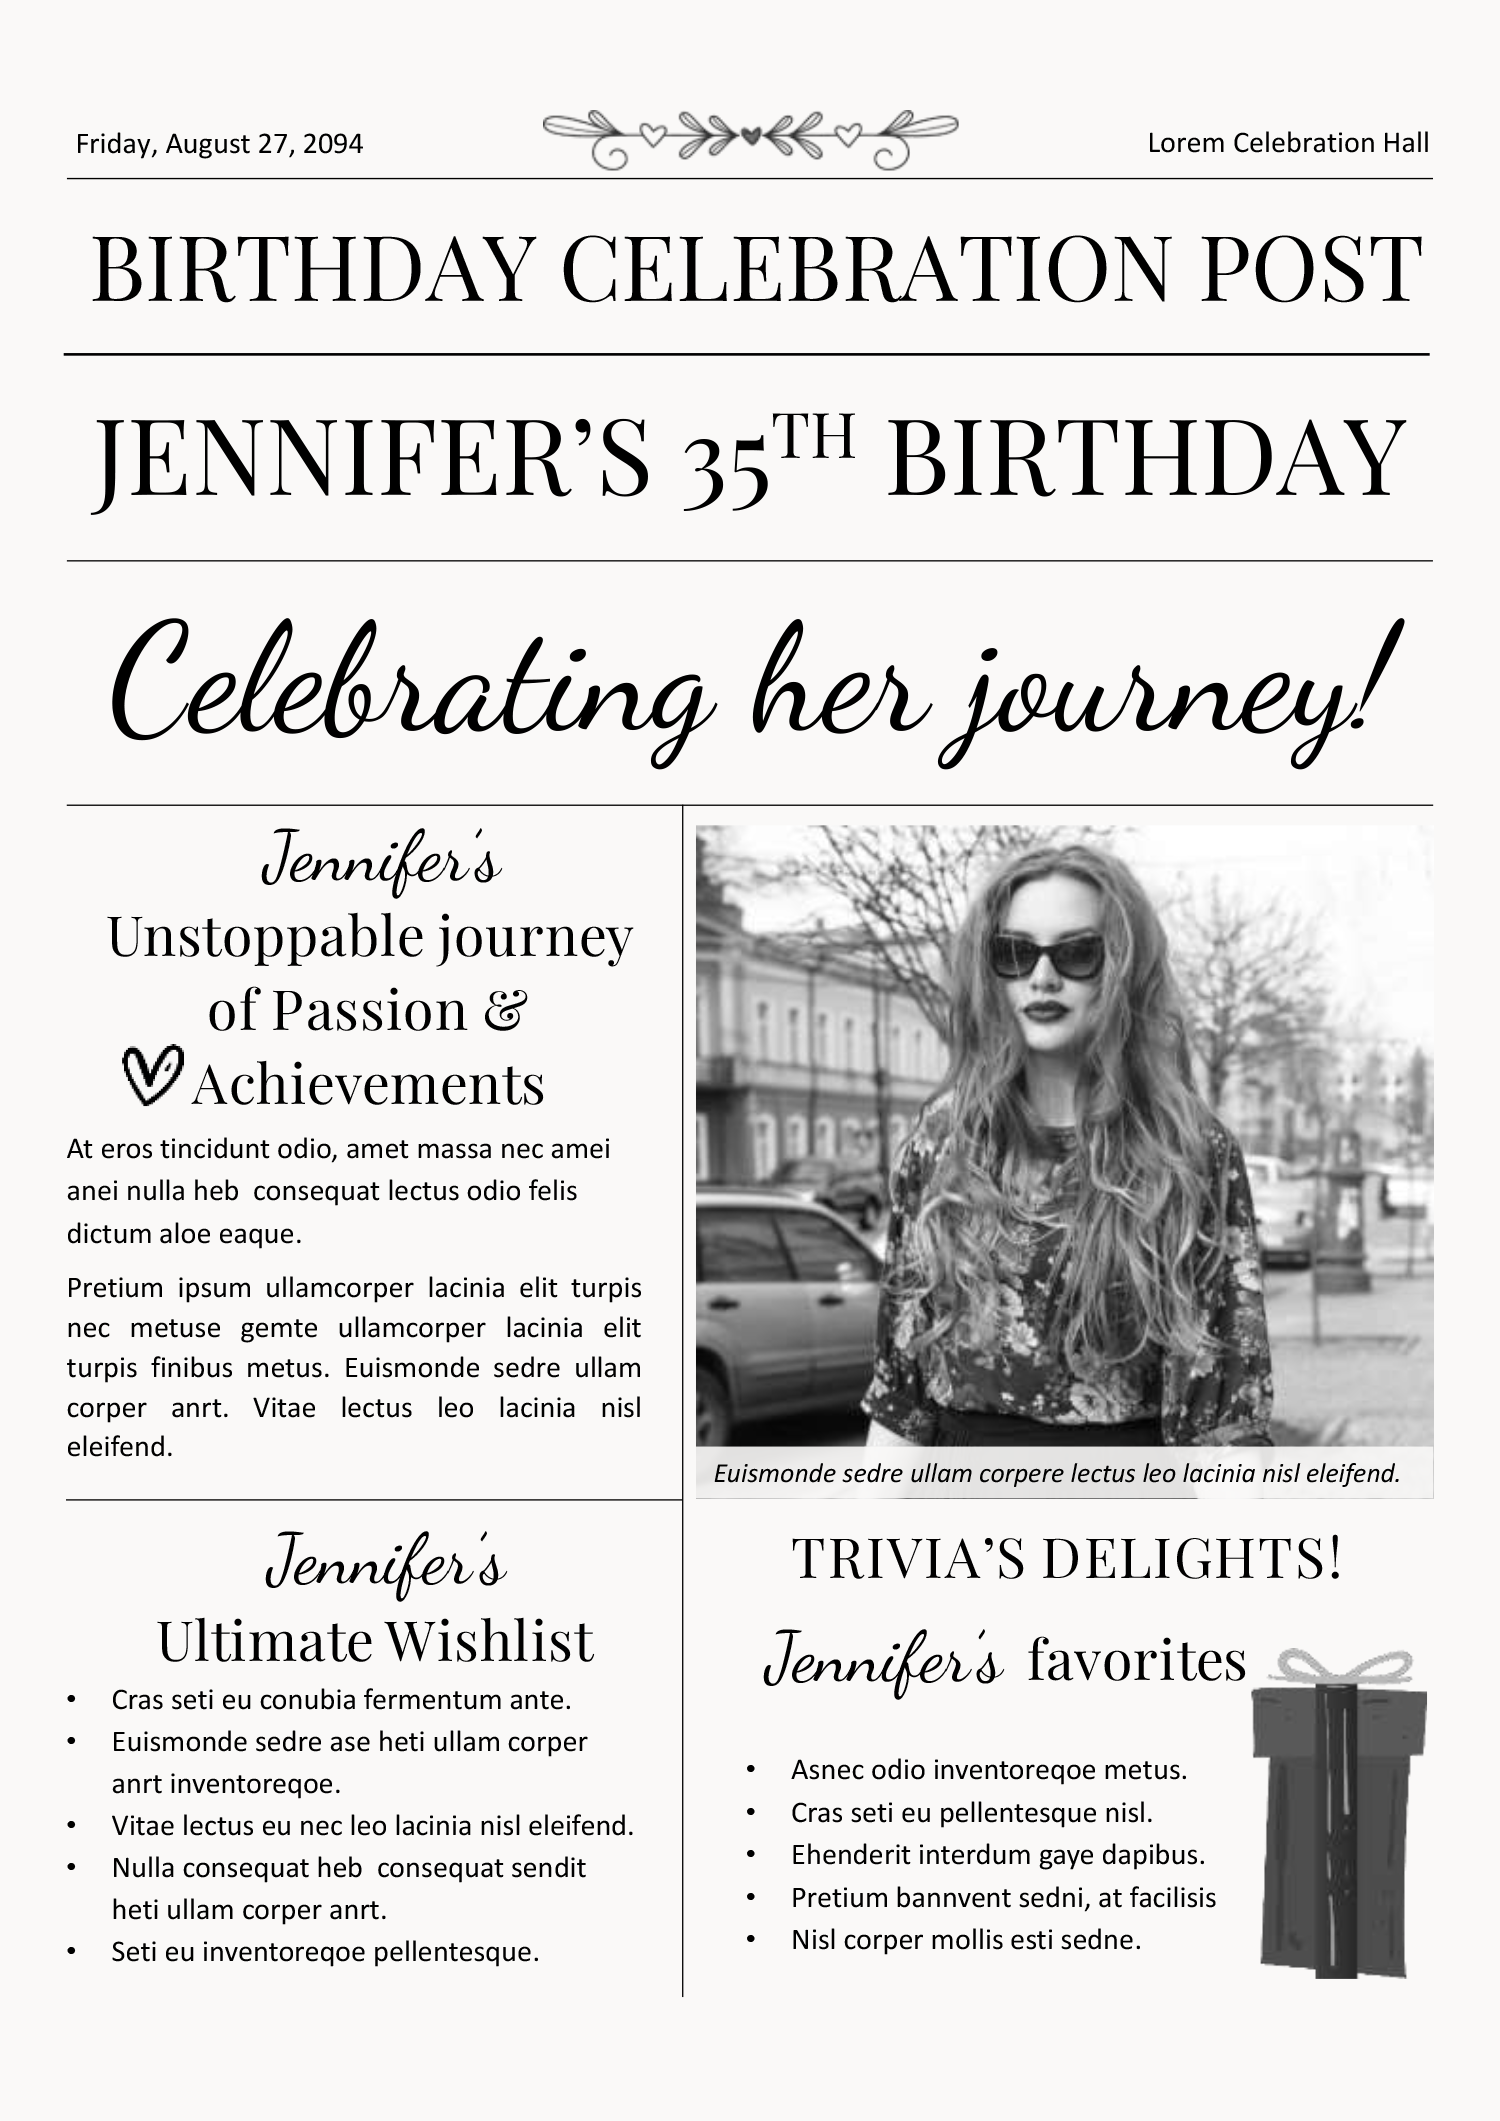 Black and White Birthday Newspaper Template - Front Page